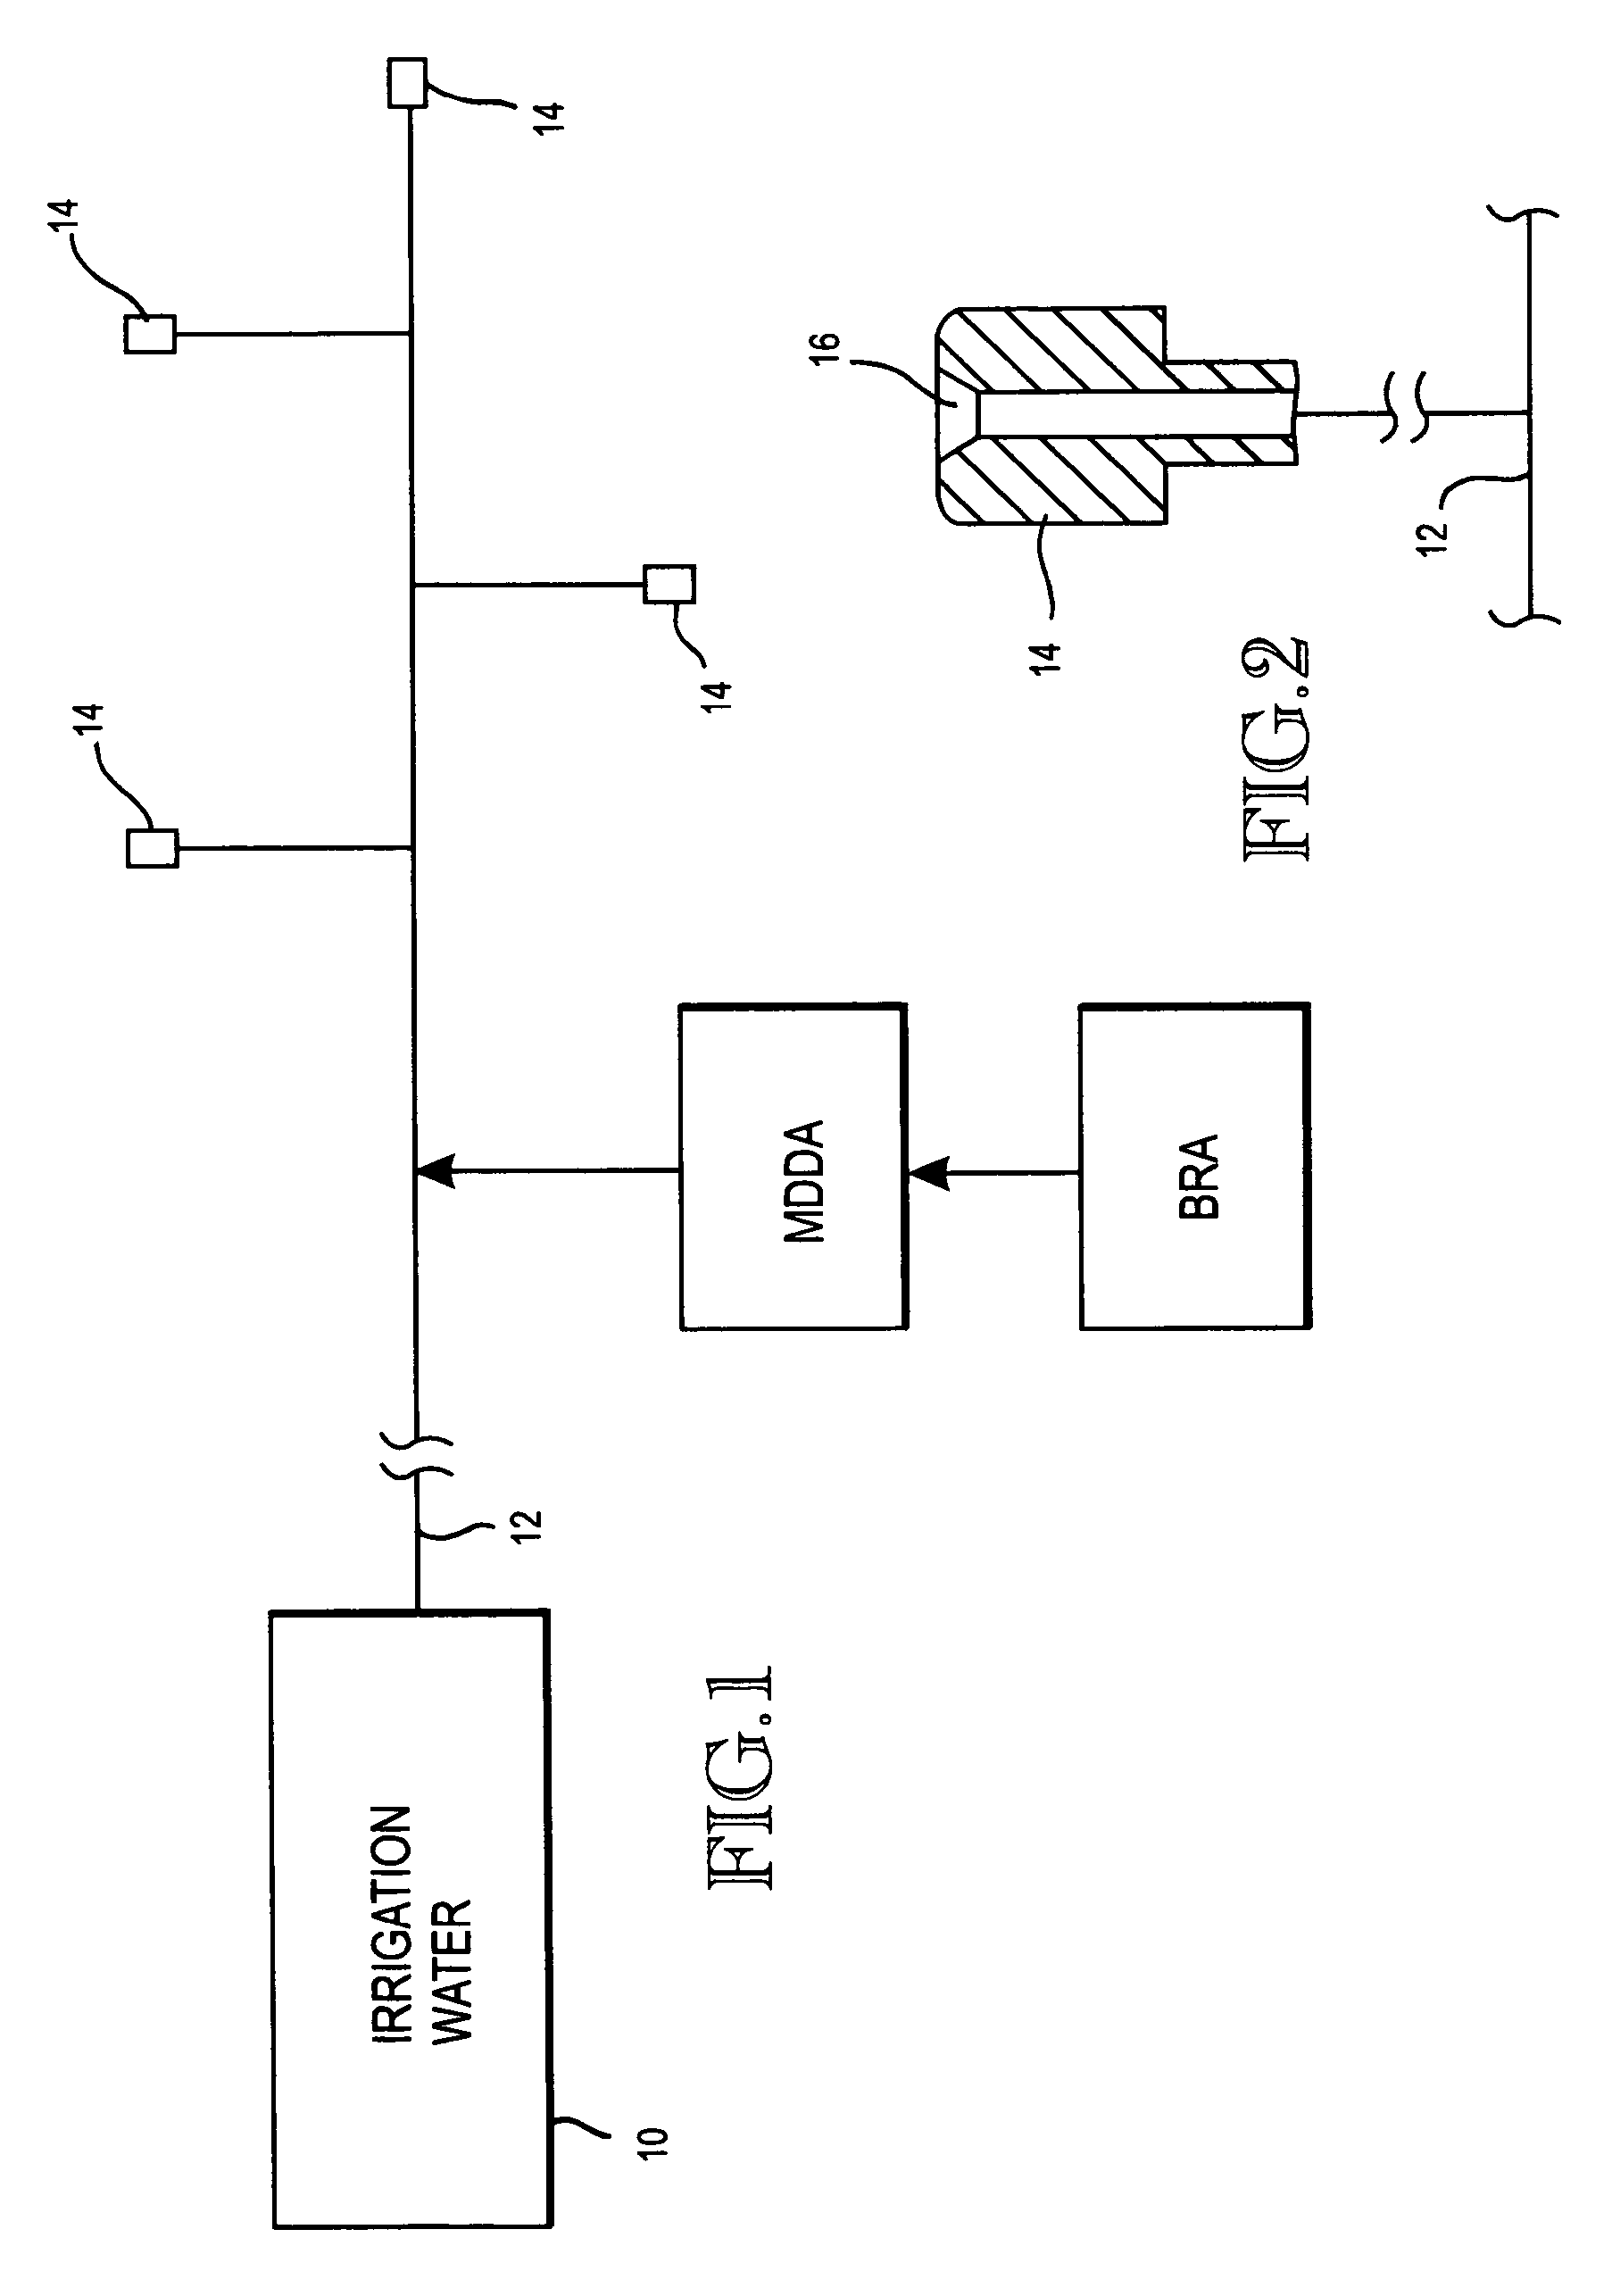 Method of promoting unrestricted flow of irrigation water through irrigation networks